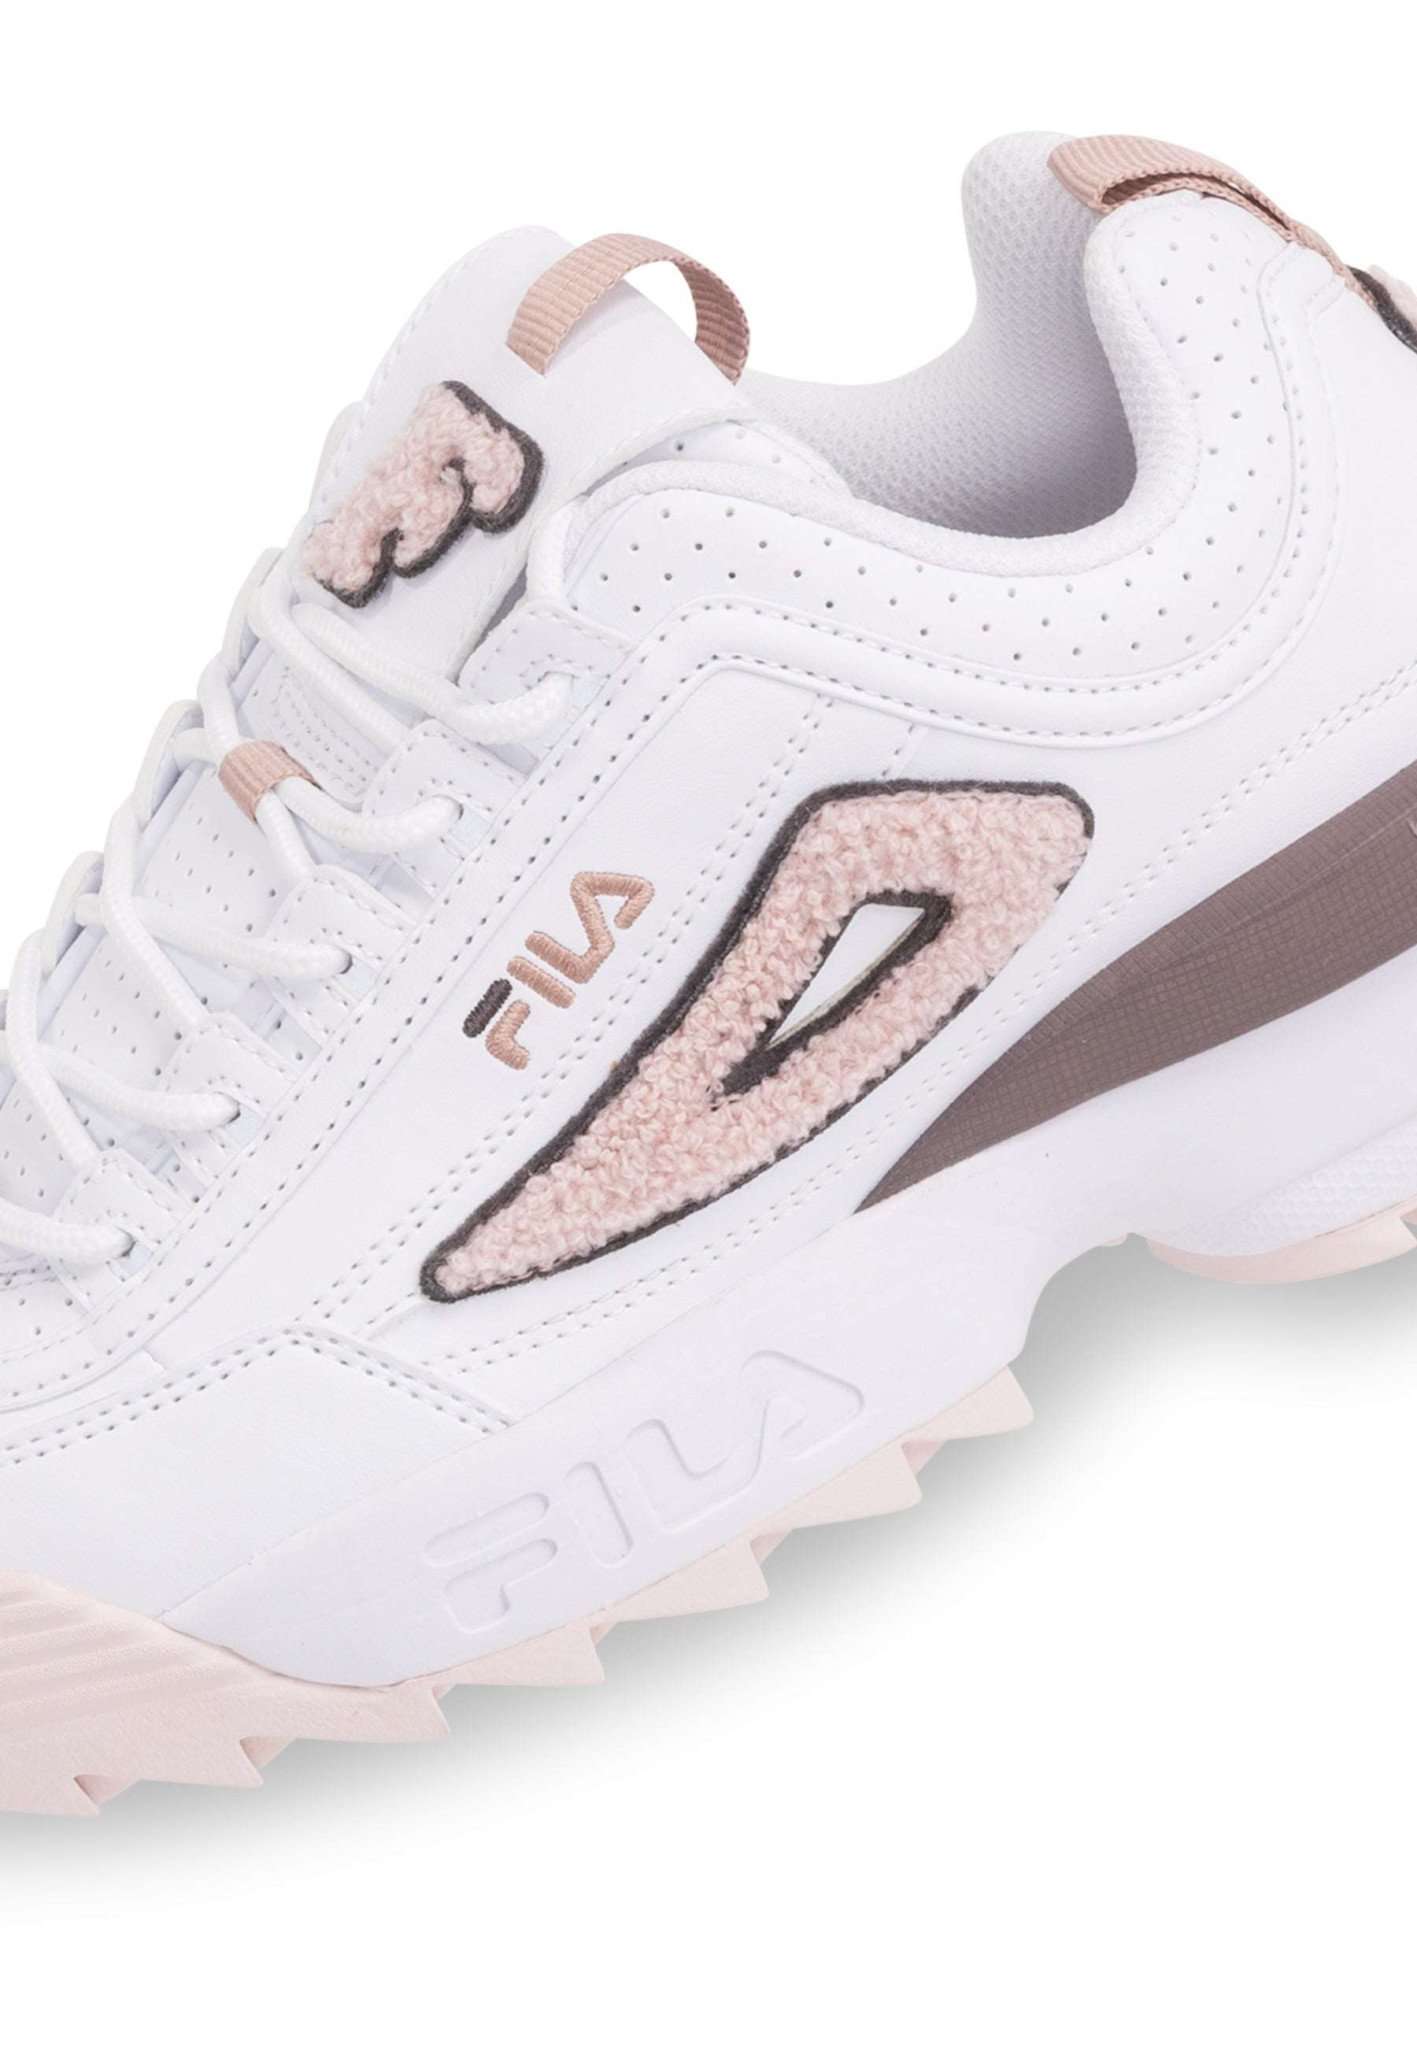 Disruptor Patch Wmn in White-Pale Mauve Sneakers Fila   